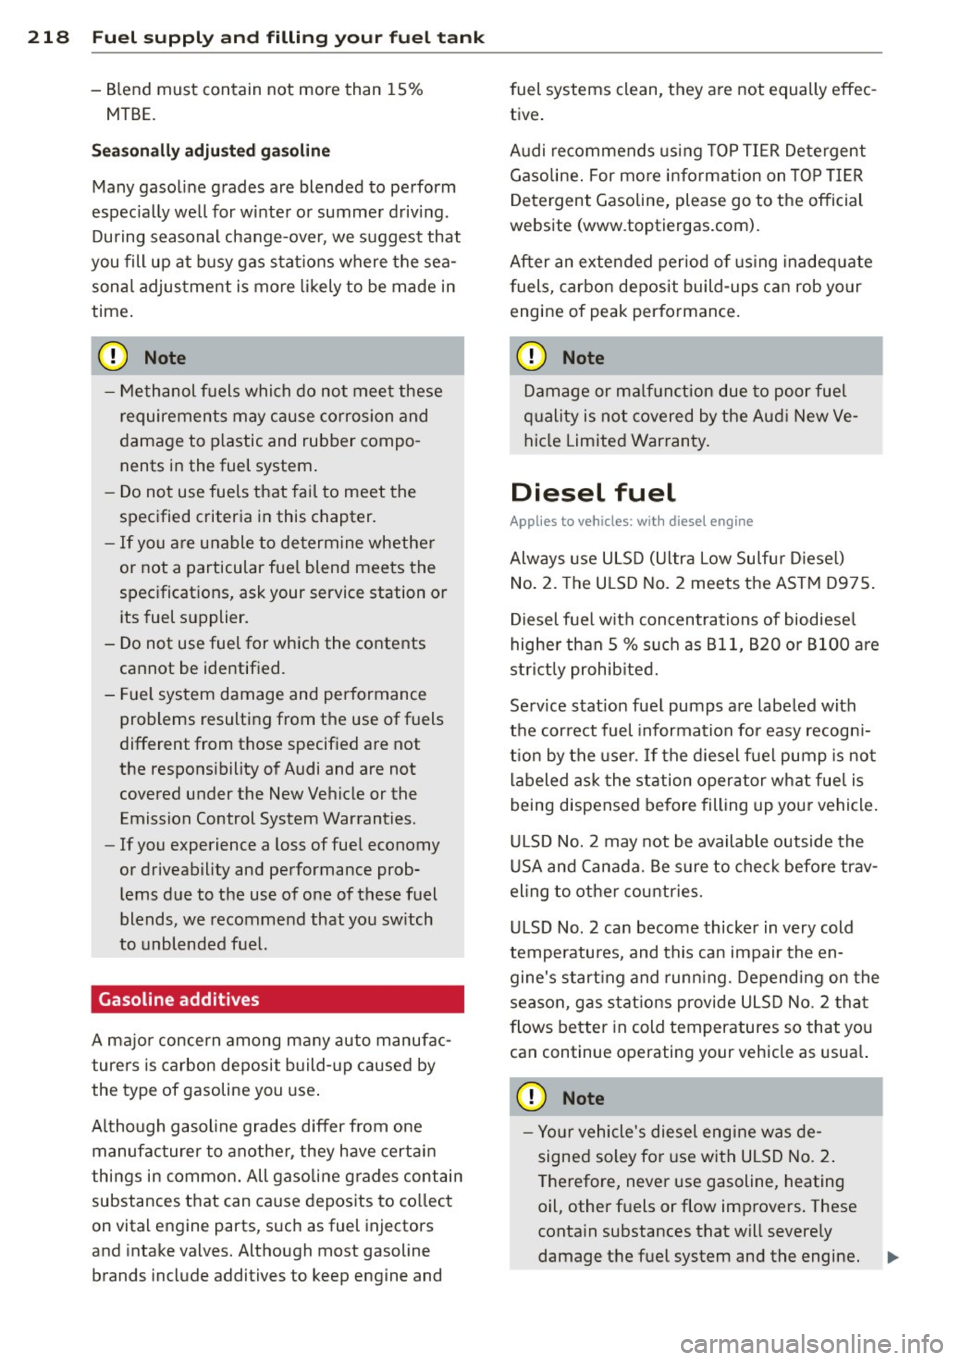 AUDI A7 2015  Owners Manual 218  Fuel supply  and  filling  your  fuel  tank 
-Blend  must  contain  not  more  than  15% 
MTBE. 
Seasonally  adjusted  gasoline 
Many  gasoline  grades  are  blended  to  perform 
espec ially  we